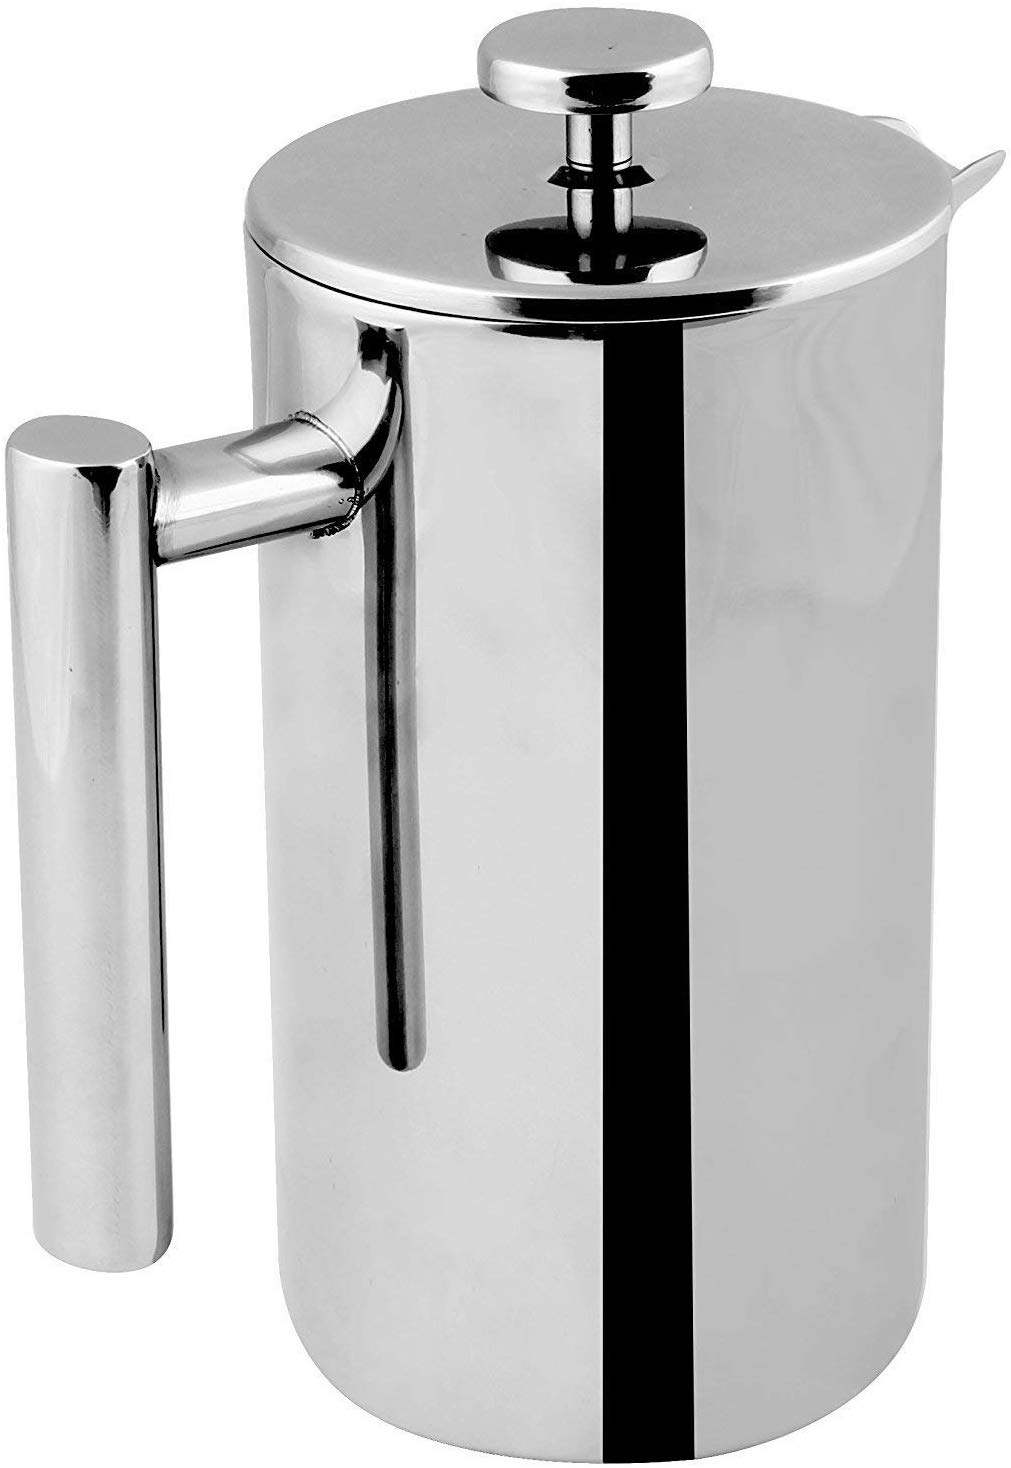 Quiseen Double Wall Stainless Steel French Press Coffee Maker 1